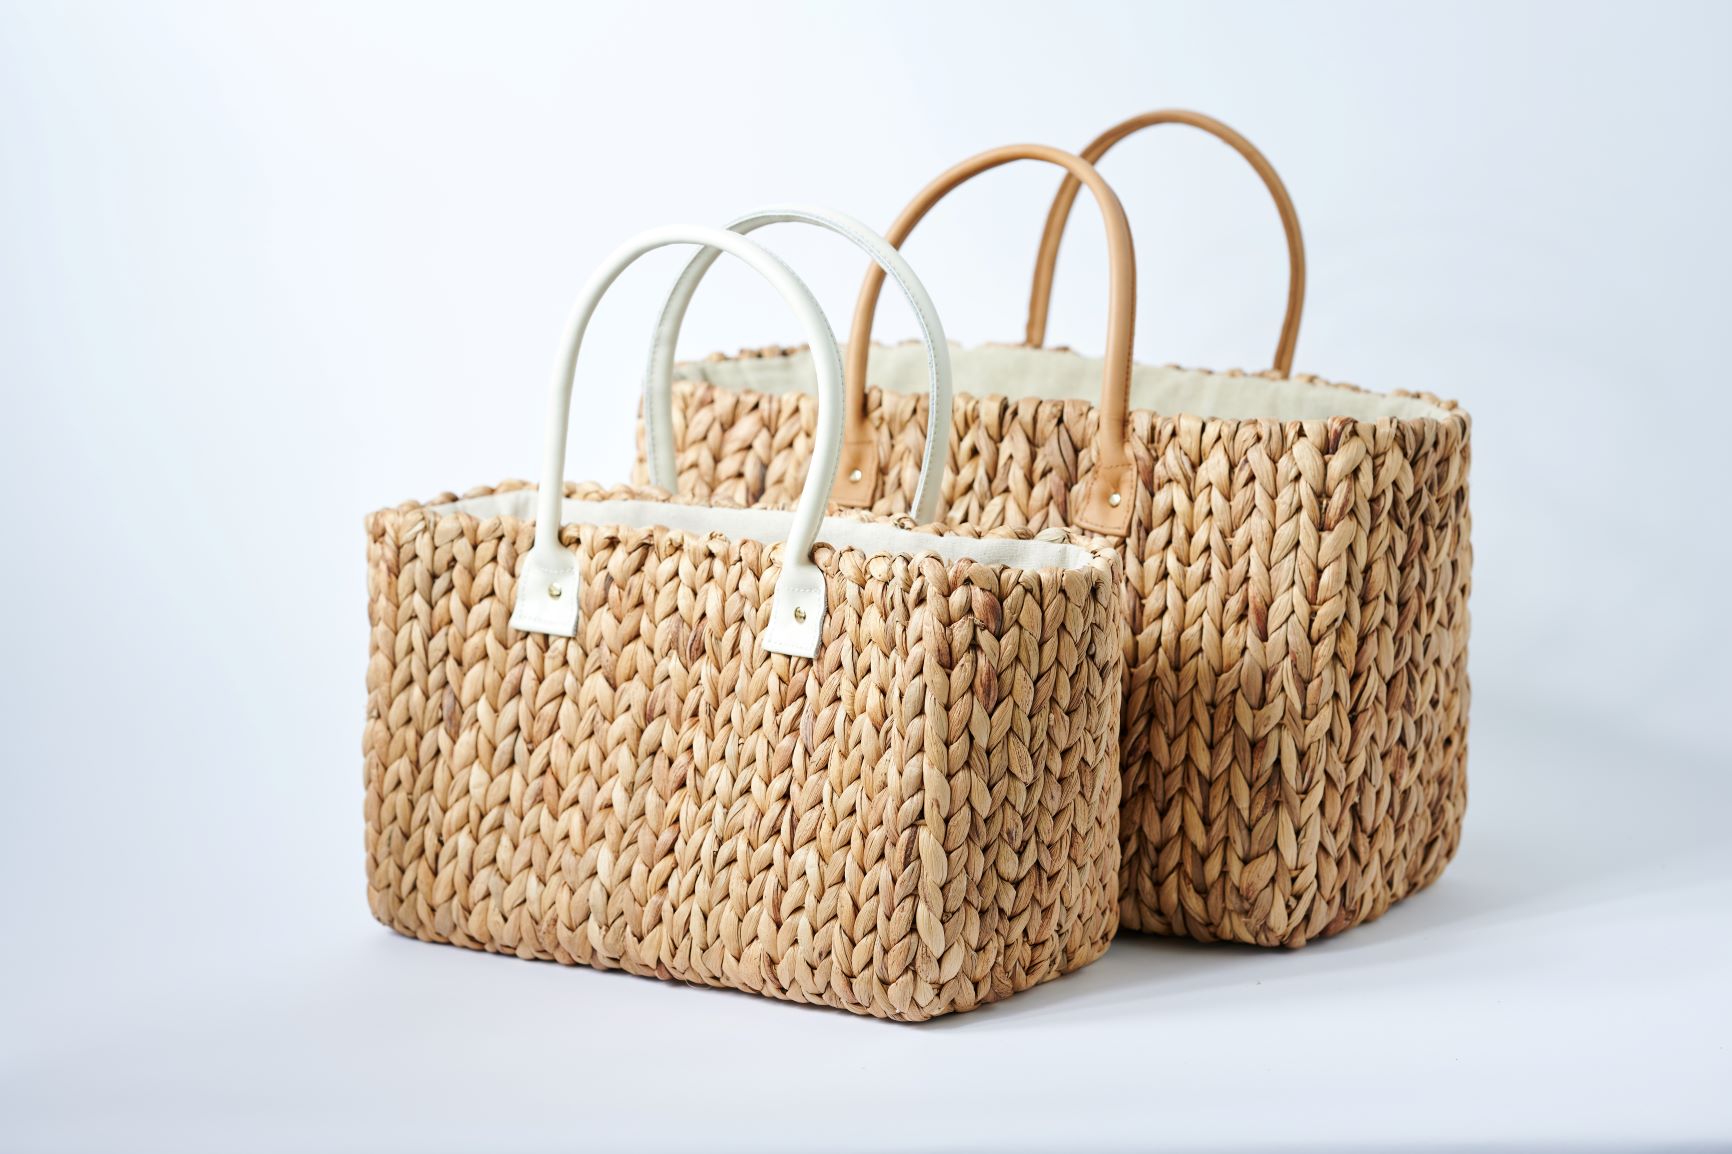 collection of 2 sizes hyacinth straw totes